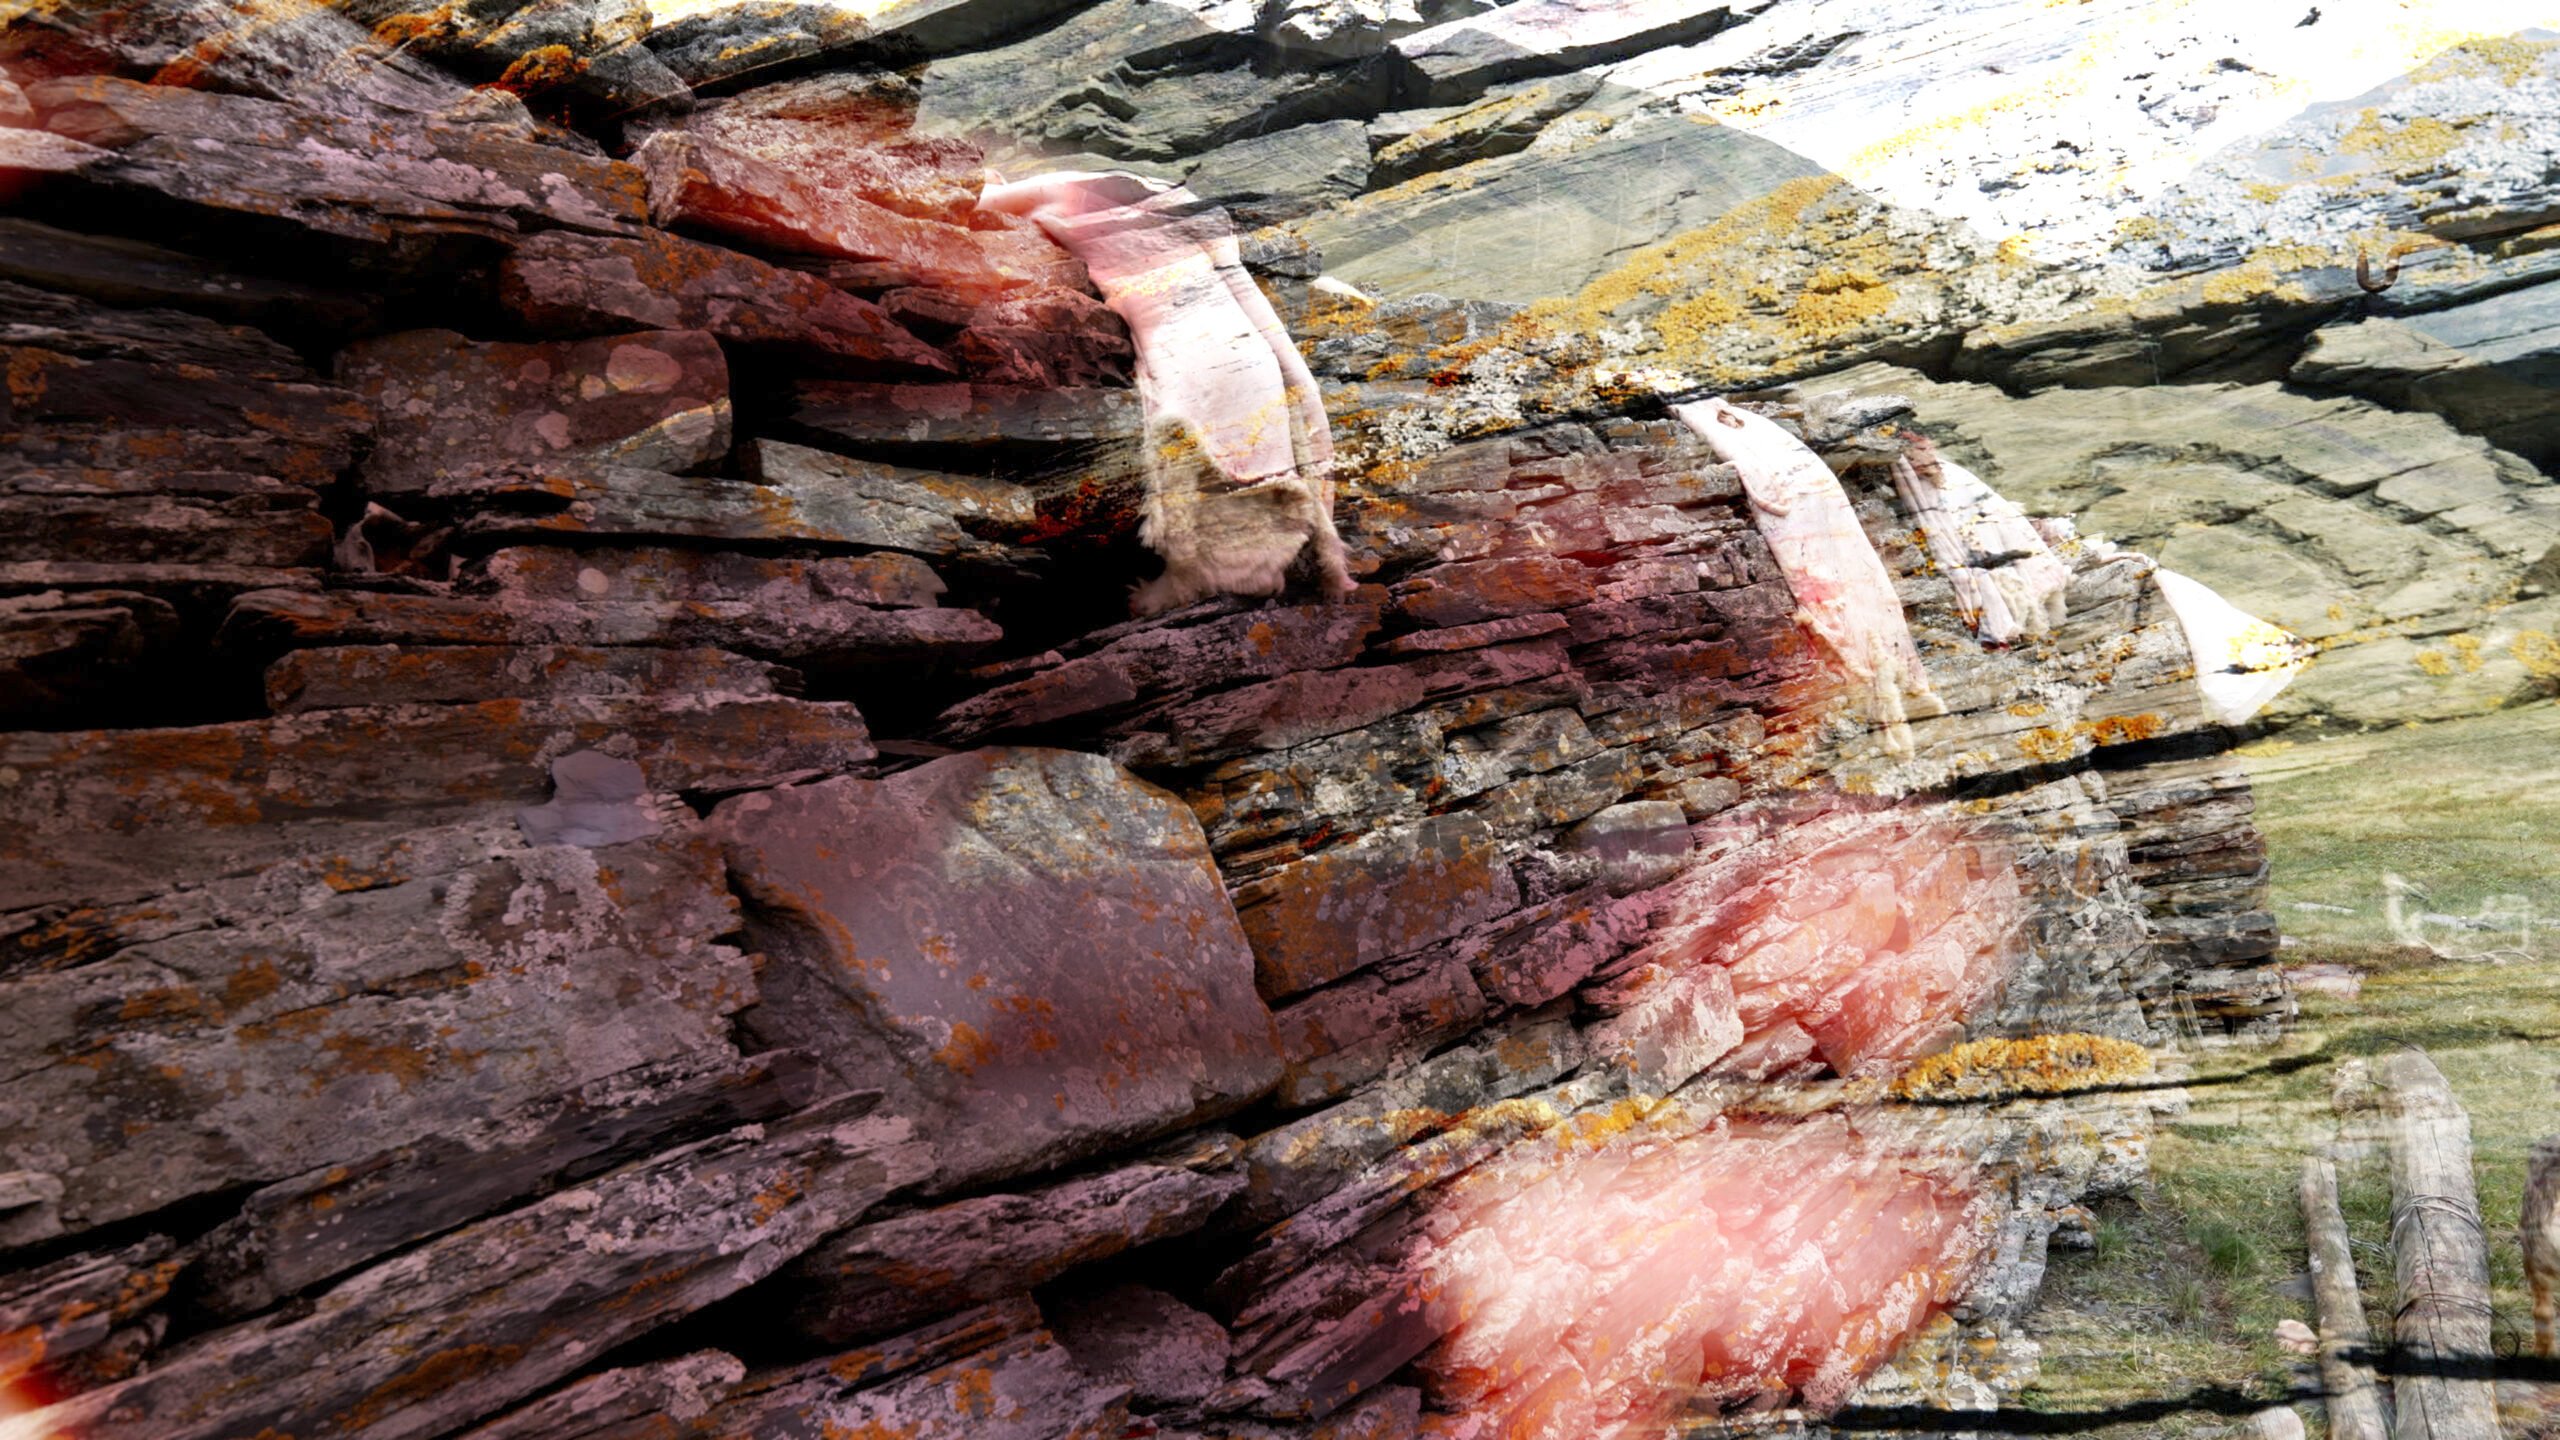 A close- up of grey, jagged sedimentary rock. The image has a double exposure effect, with the rock overlaid by a grassy mountain and red tones.